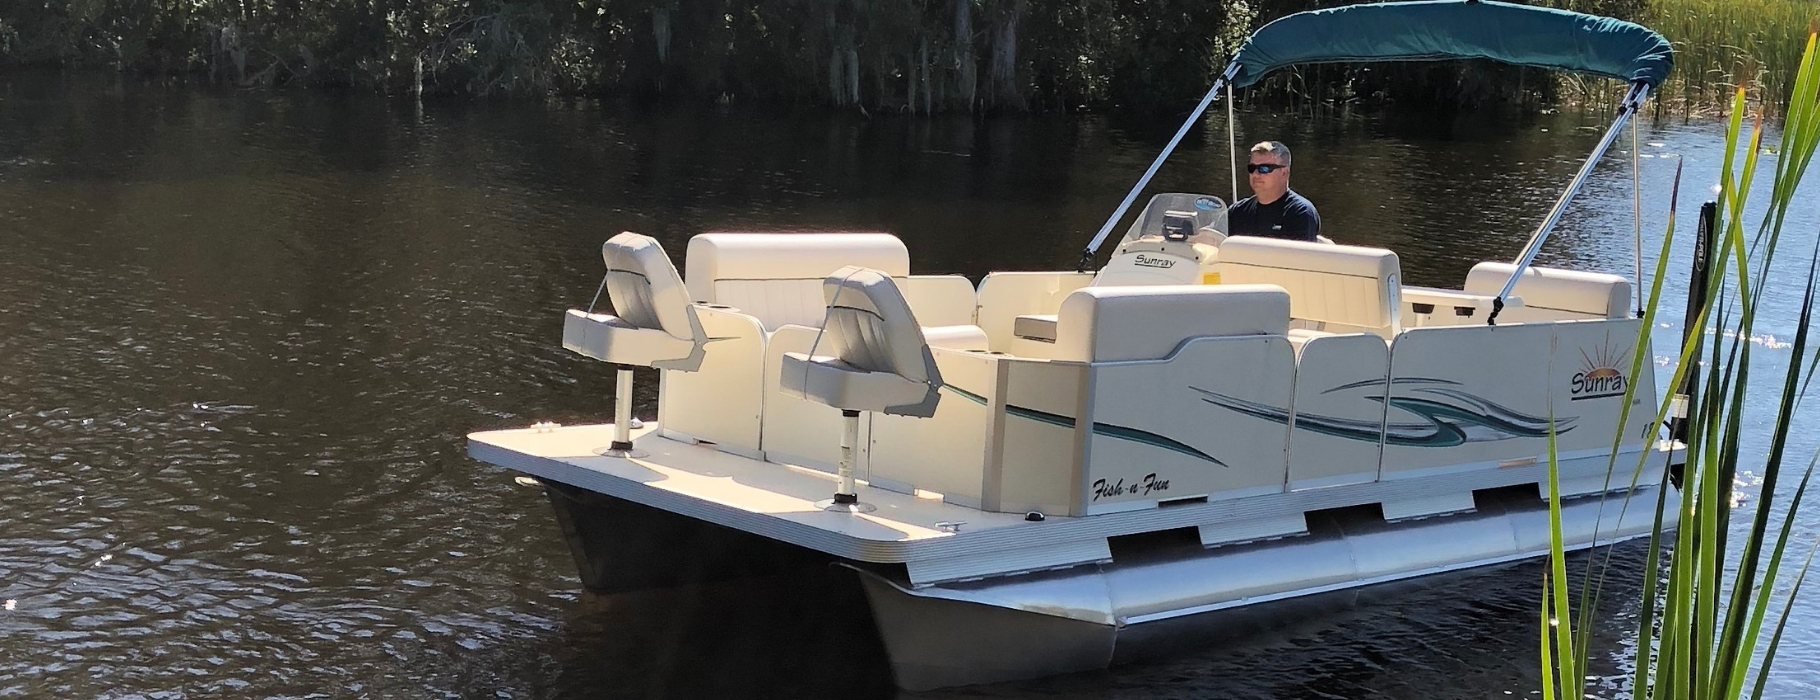 Mini Pontoons for Leisure On The Water 